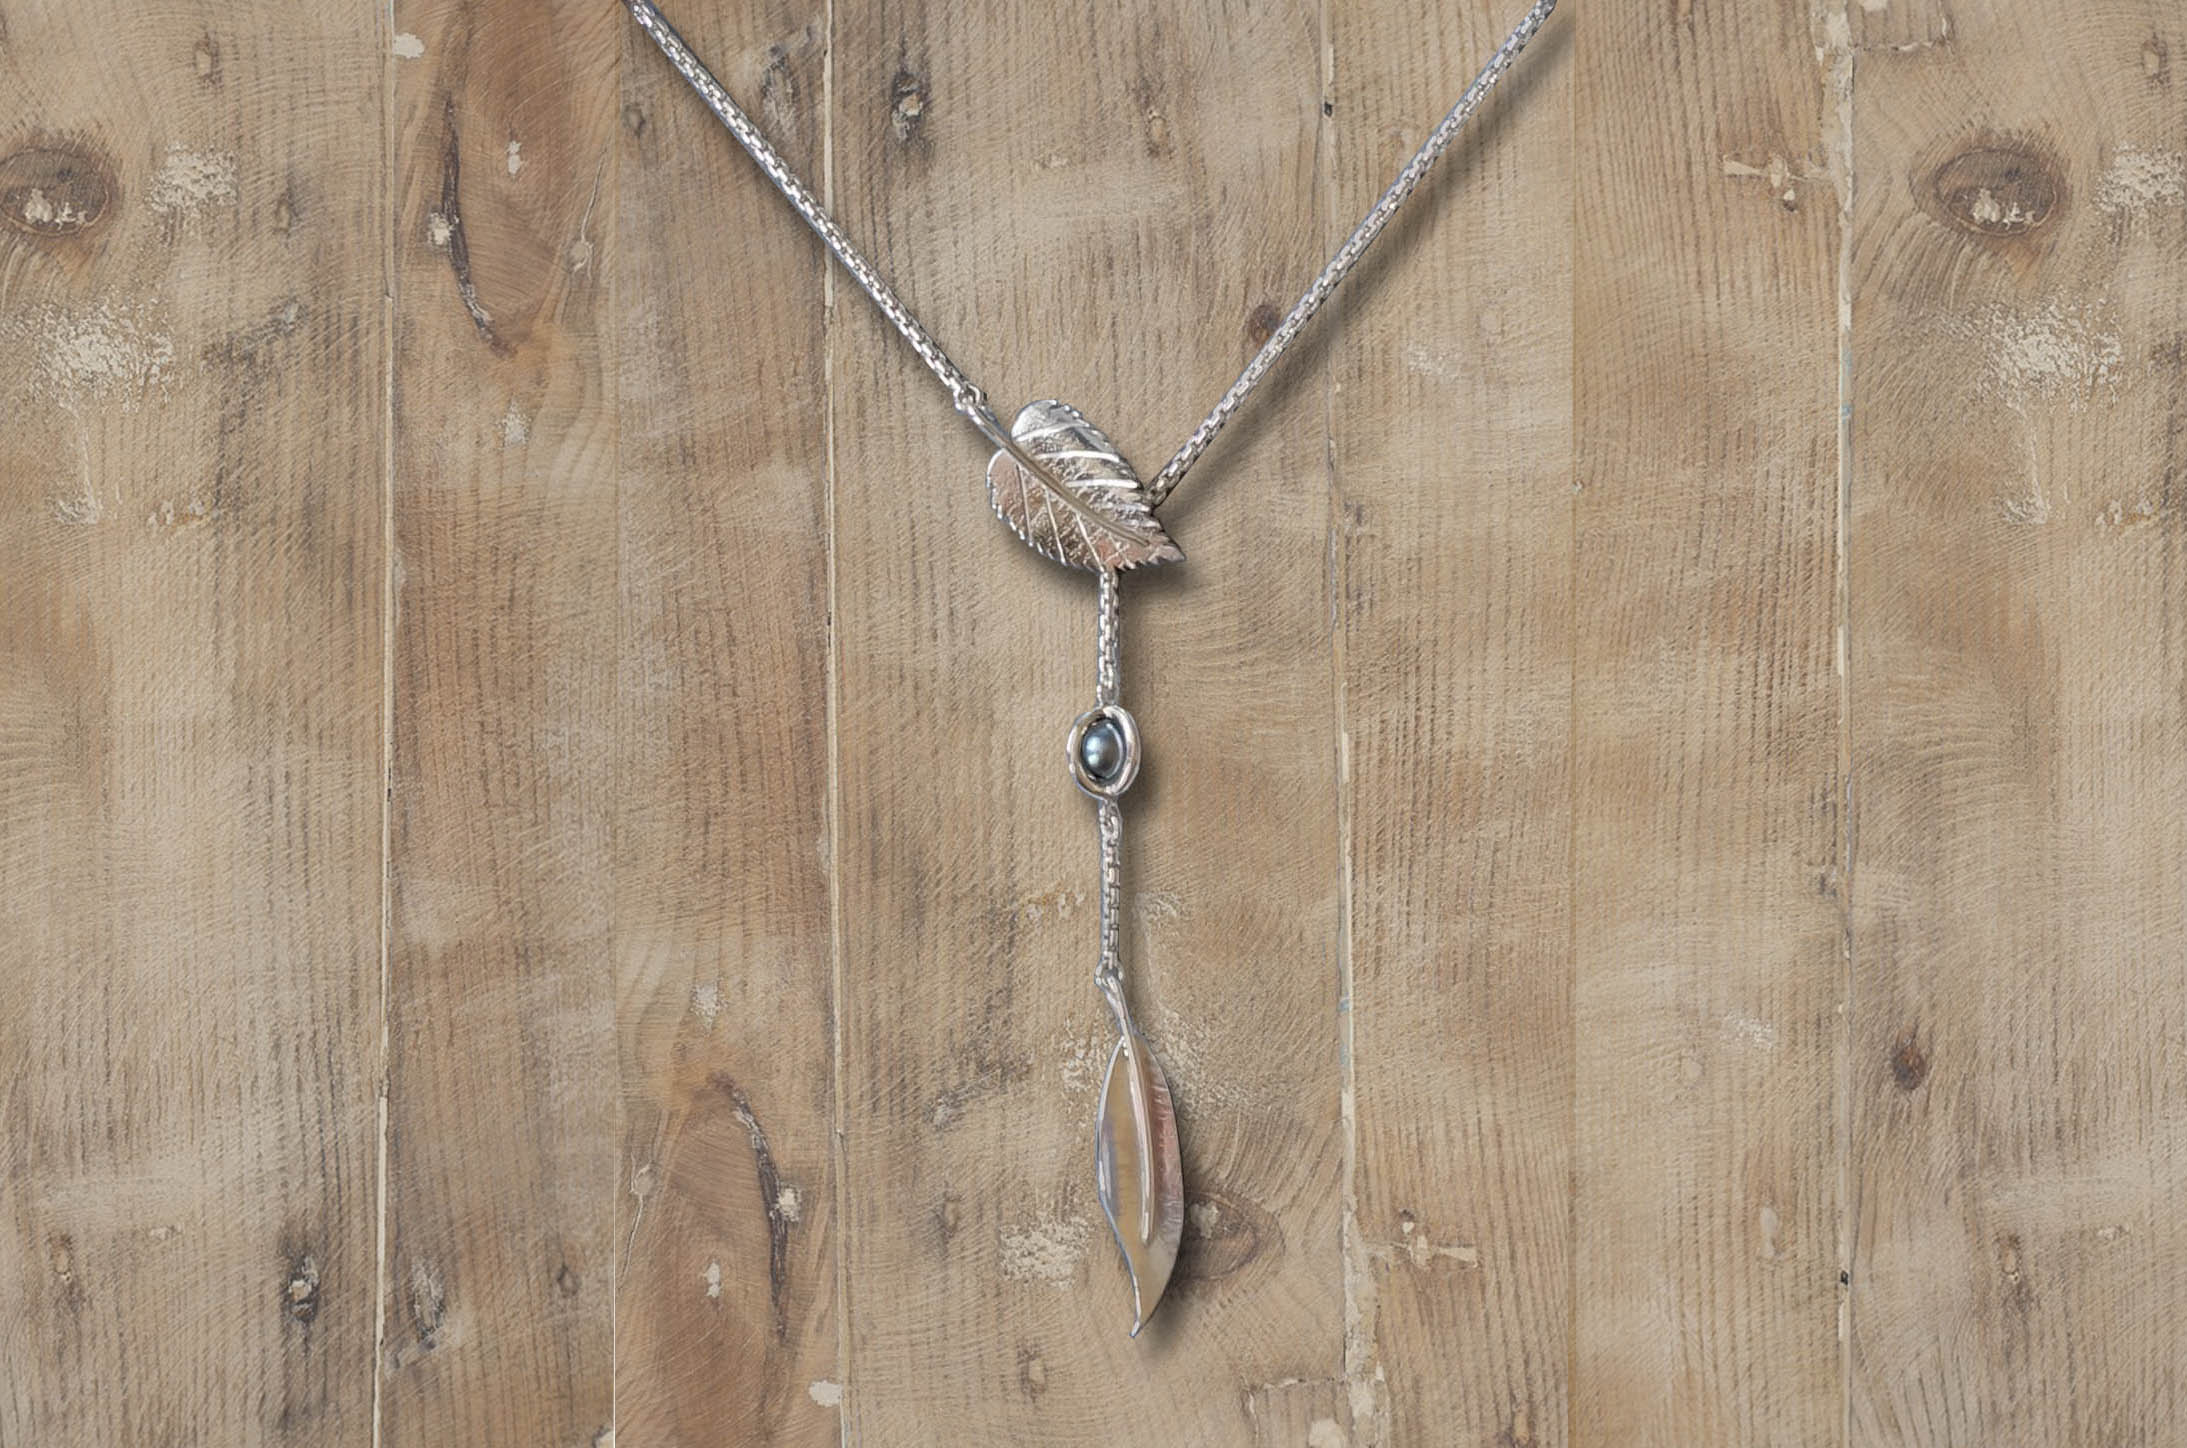 Park Road Jewellery, Bespoke Handmade Sterling Silver Hazel and Willow Leaf Pearl Necklace